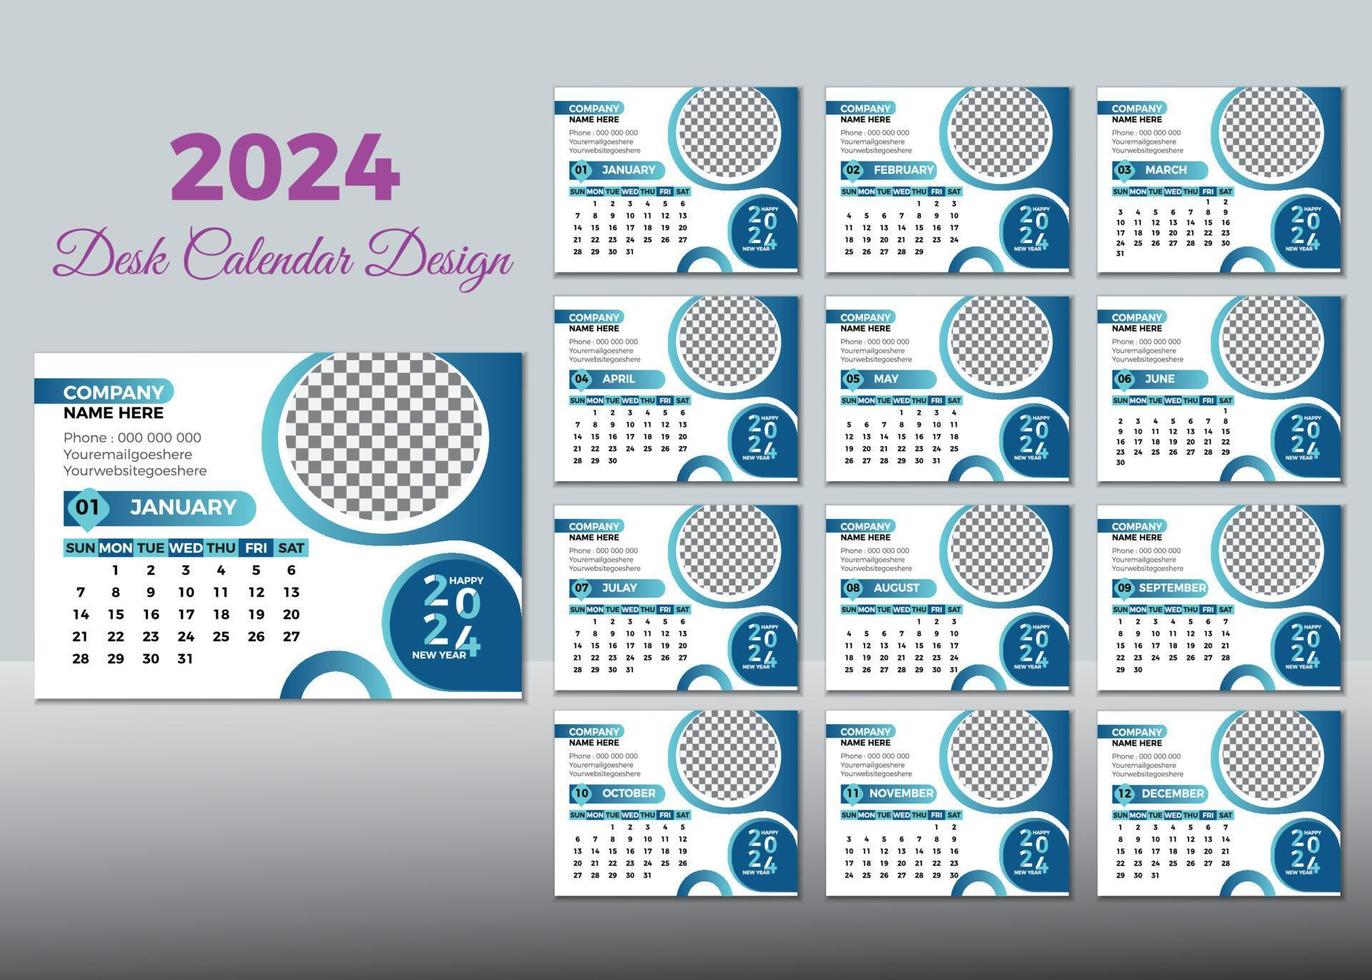 https://static.vecteezy.com/system/resources/previews/020/495/837/non_2x/desk-calendar-2024-or-monthly-weekly-schedule-new-year-calendar-2024-design-template-vector.jpg